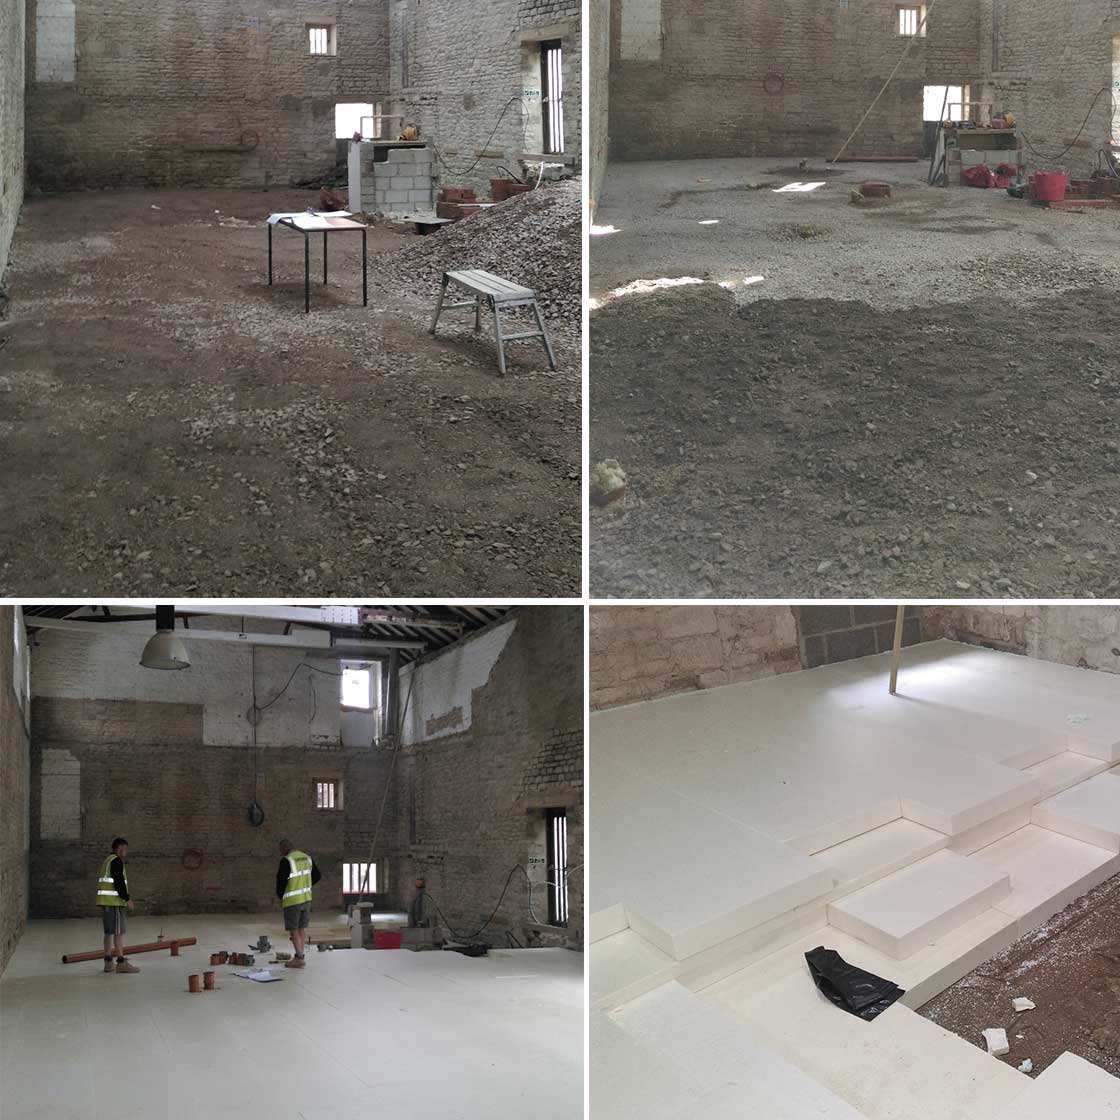 The decision was taken to change the floor levels and install an insulated slab, which would also help to thermally isolate the new three storey load bearing structure from the ground and walls. 230mm of Hexatherm XPS insulation was installed to deliver a U-value of 0.094